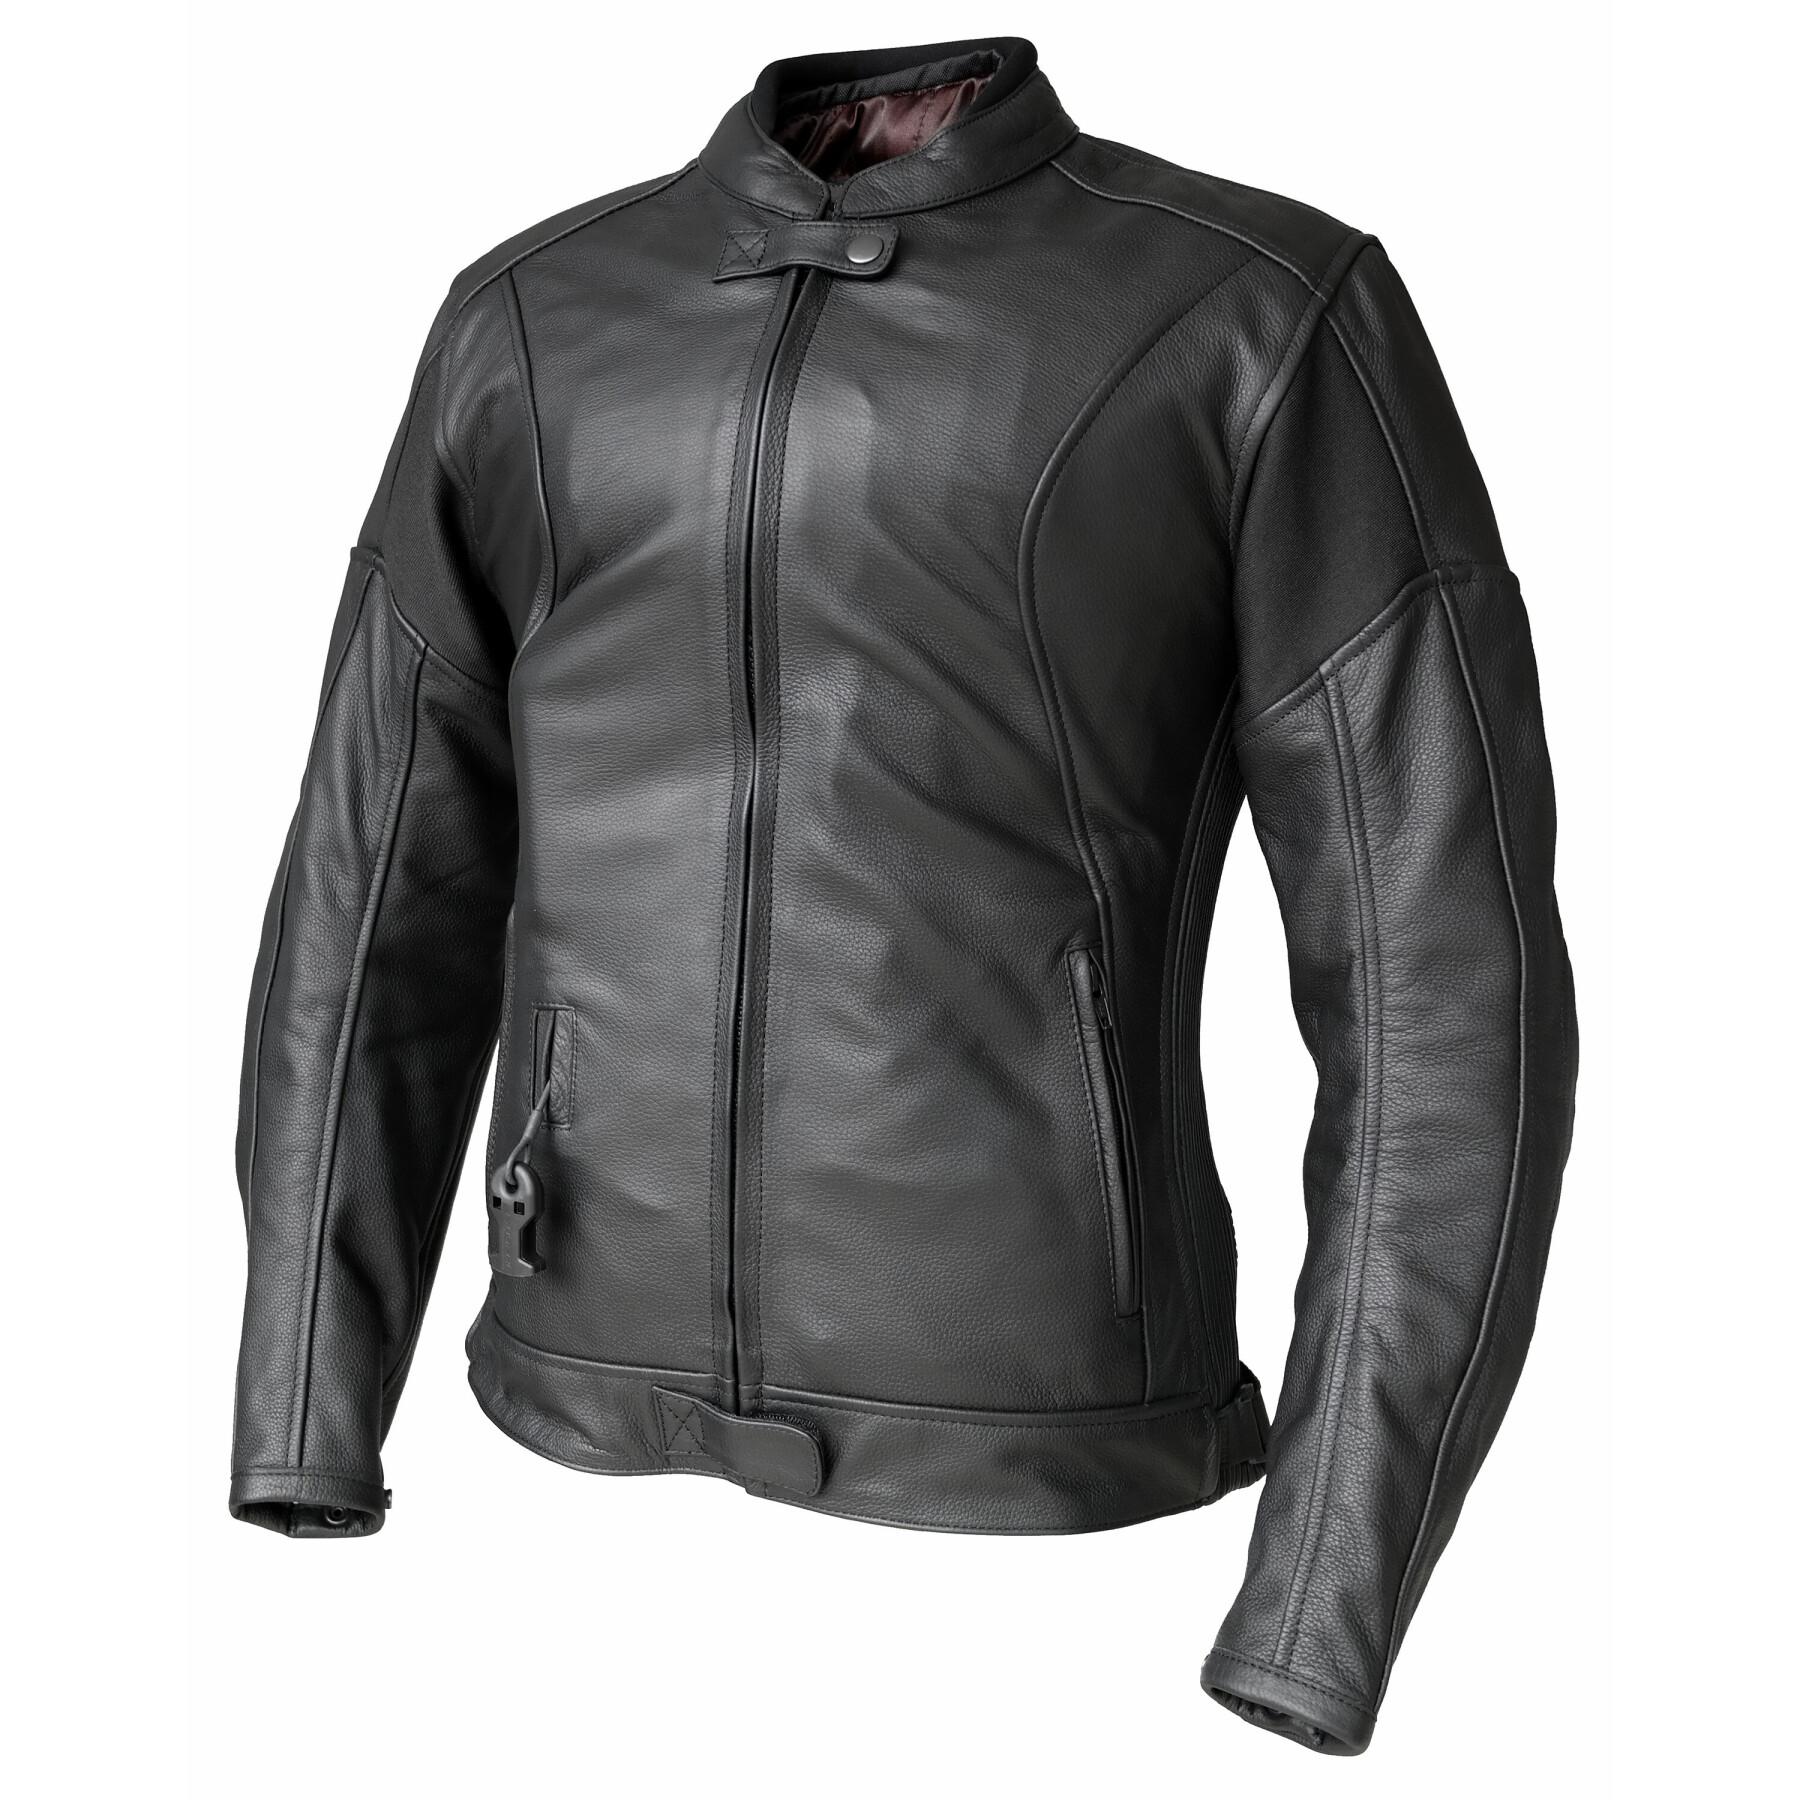 Motorcycle airbag jacket for women Helite xena